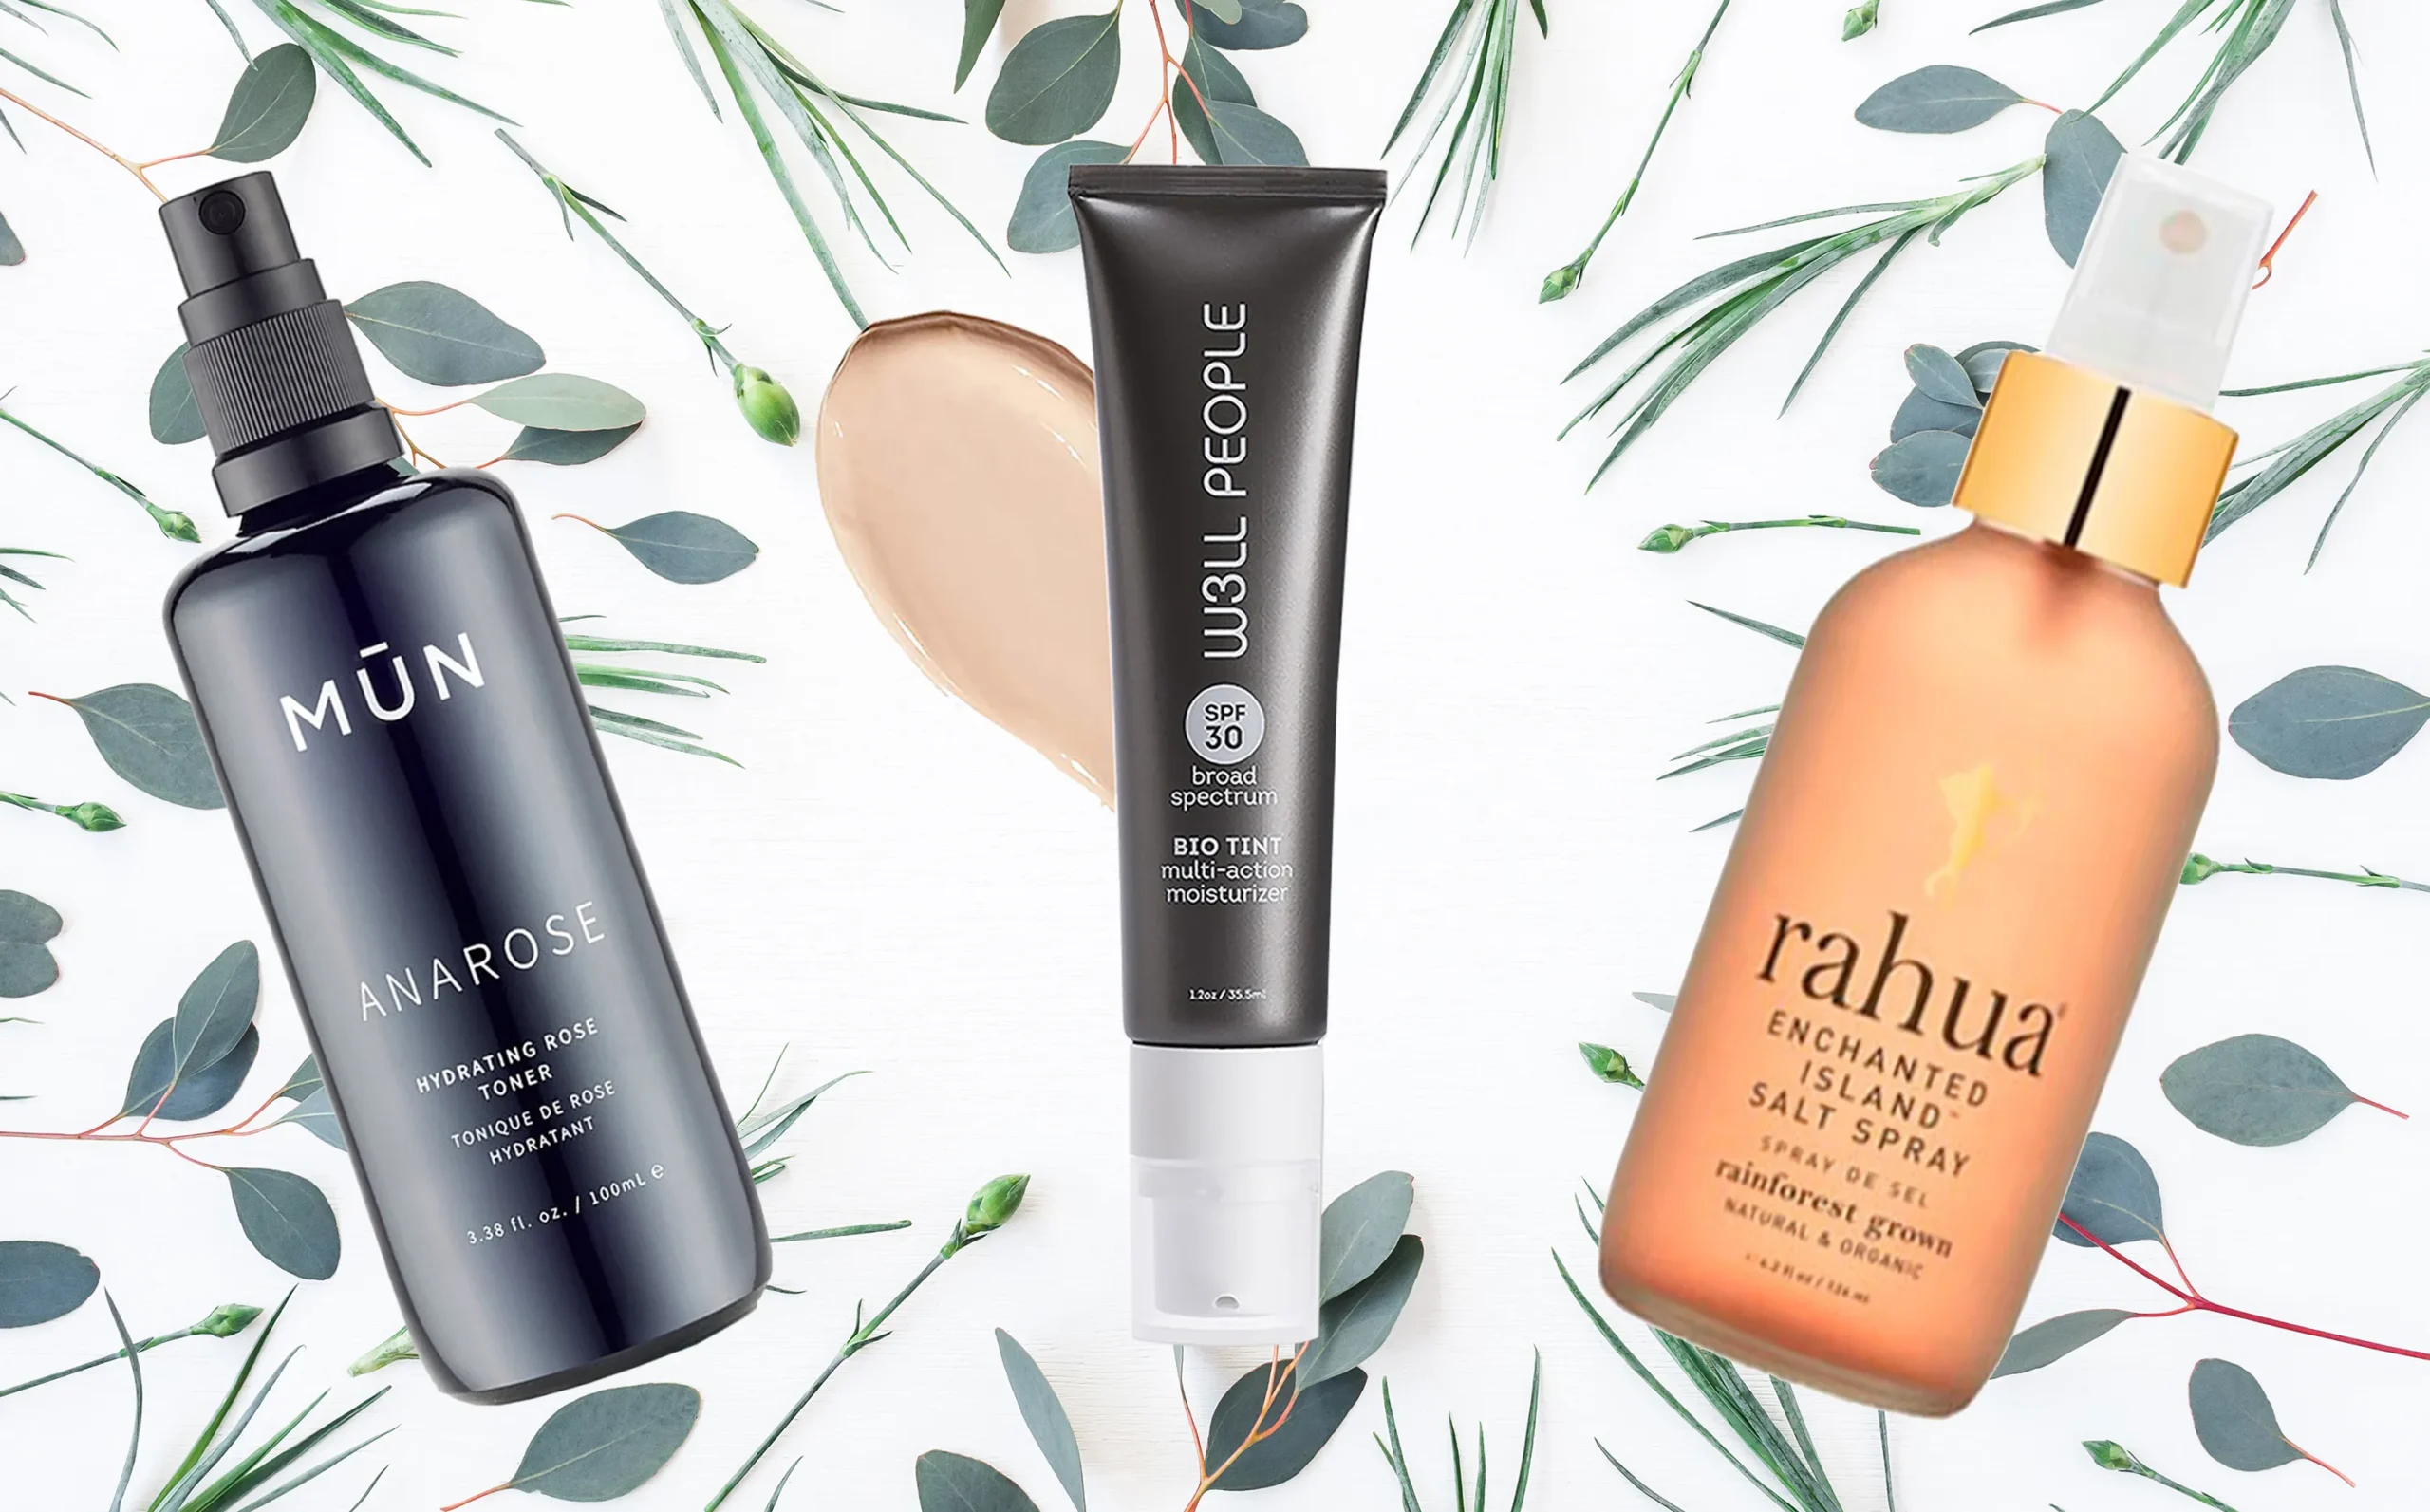 Top 7 Skin Products That Will Make Your Summer Amazing